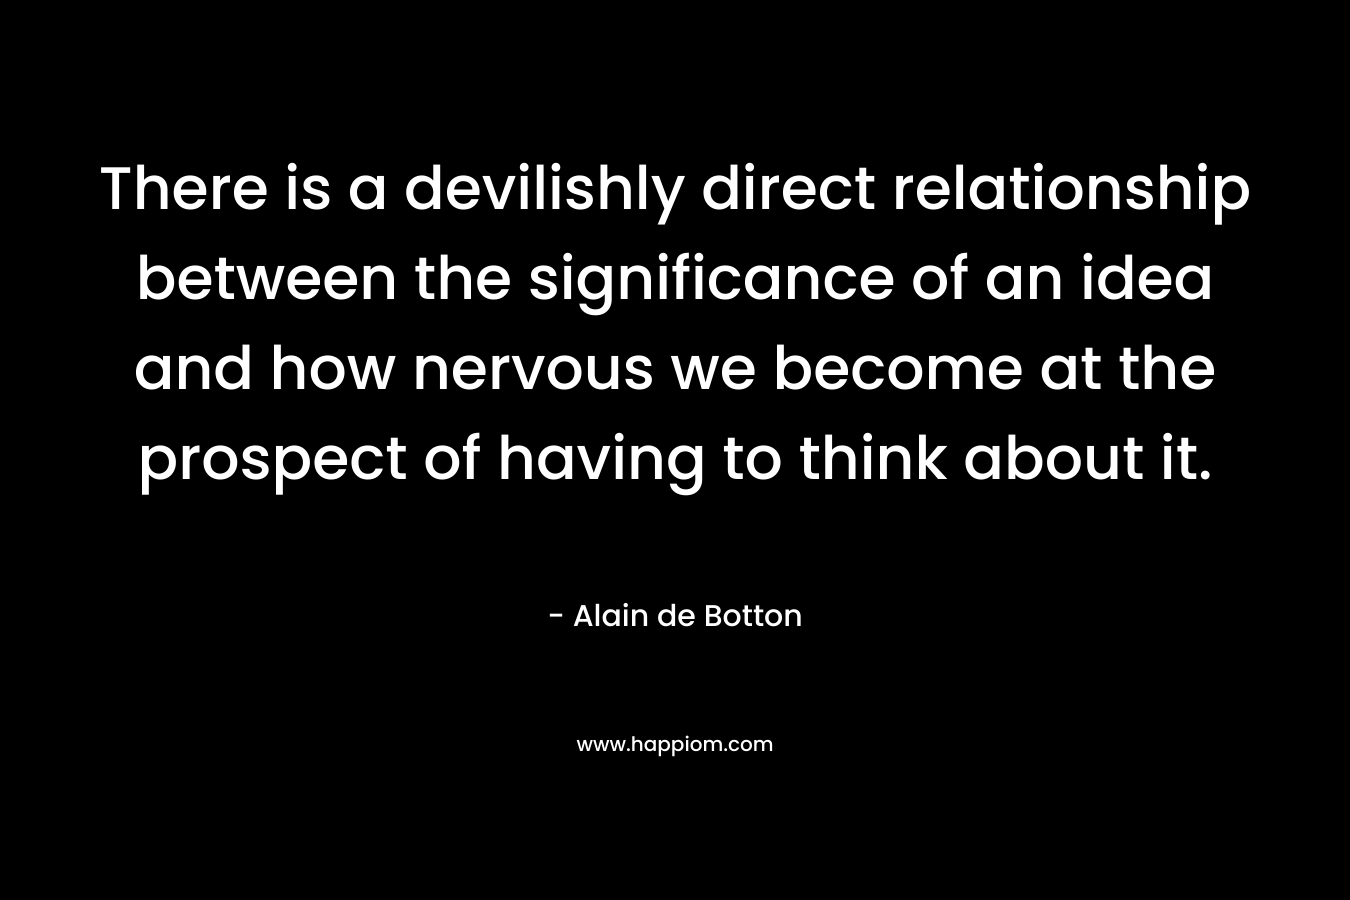 There is a devilishly direct relationship between the significance of an idea and how nervous we become at the prospect of having to think about it. – Alain de Botton